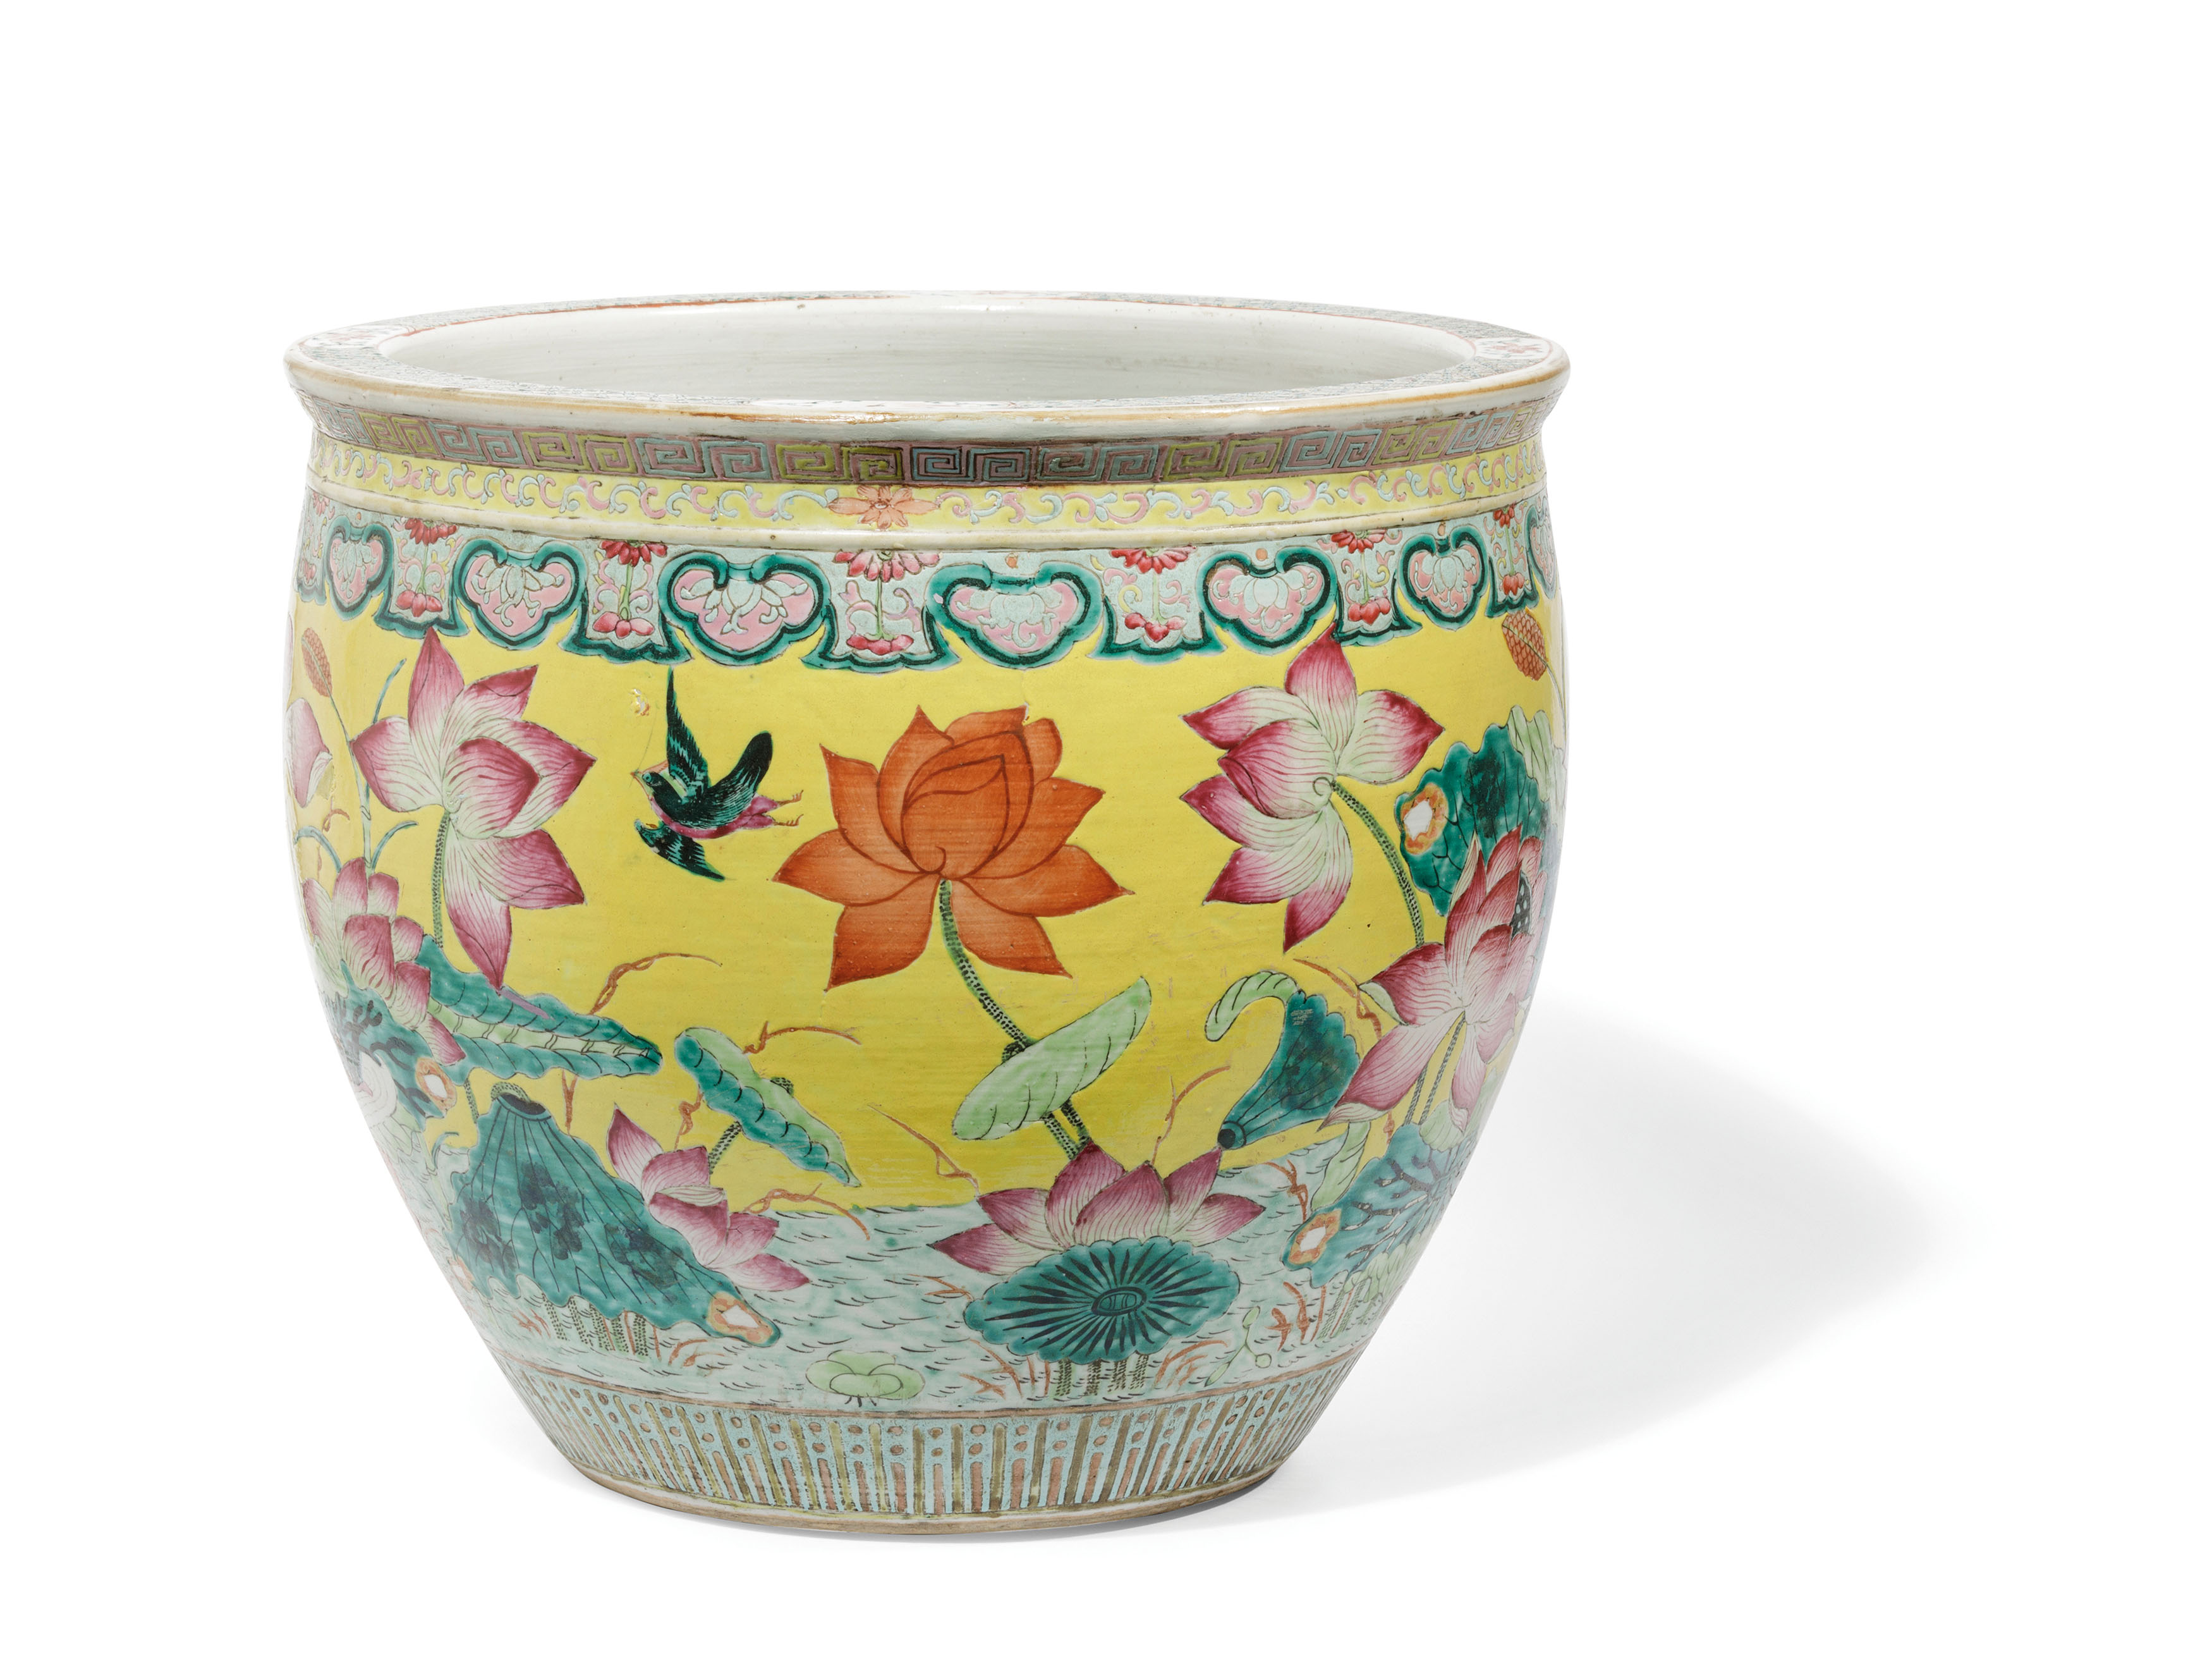 A LARGE FAMILLE ROSE PORCELAIN YELLOW GROUND FISH BOWL, CHINA, 19TH -20TH CENTURY - Image 2 of 4